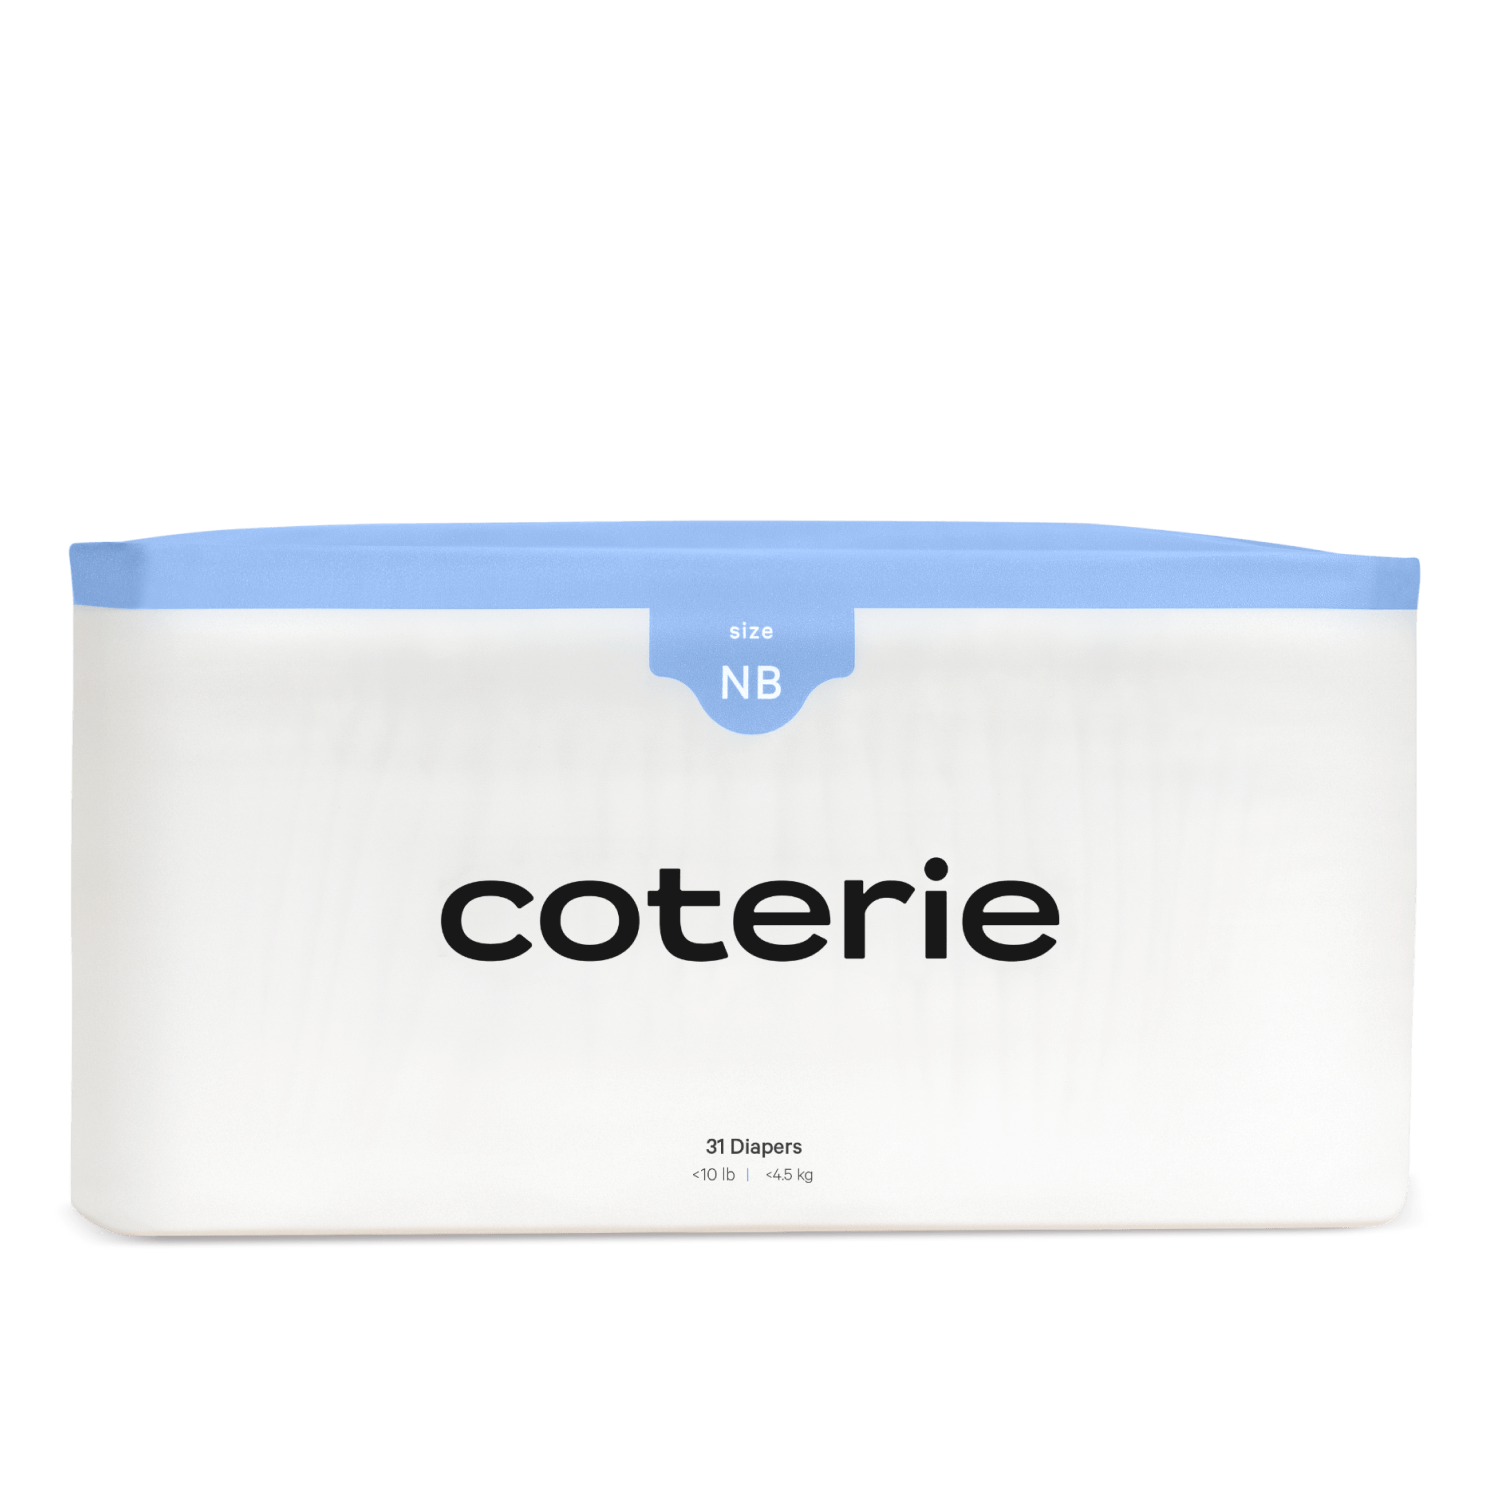 Coterie Diapers Pricing, Cost, Reviews